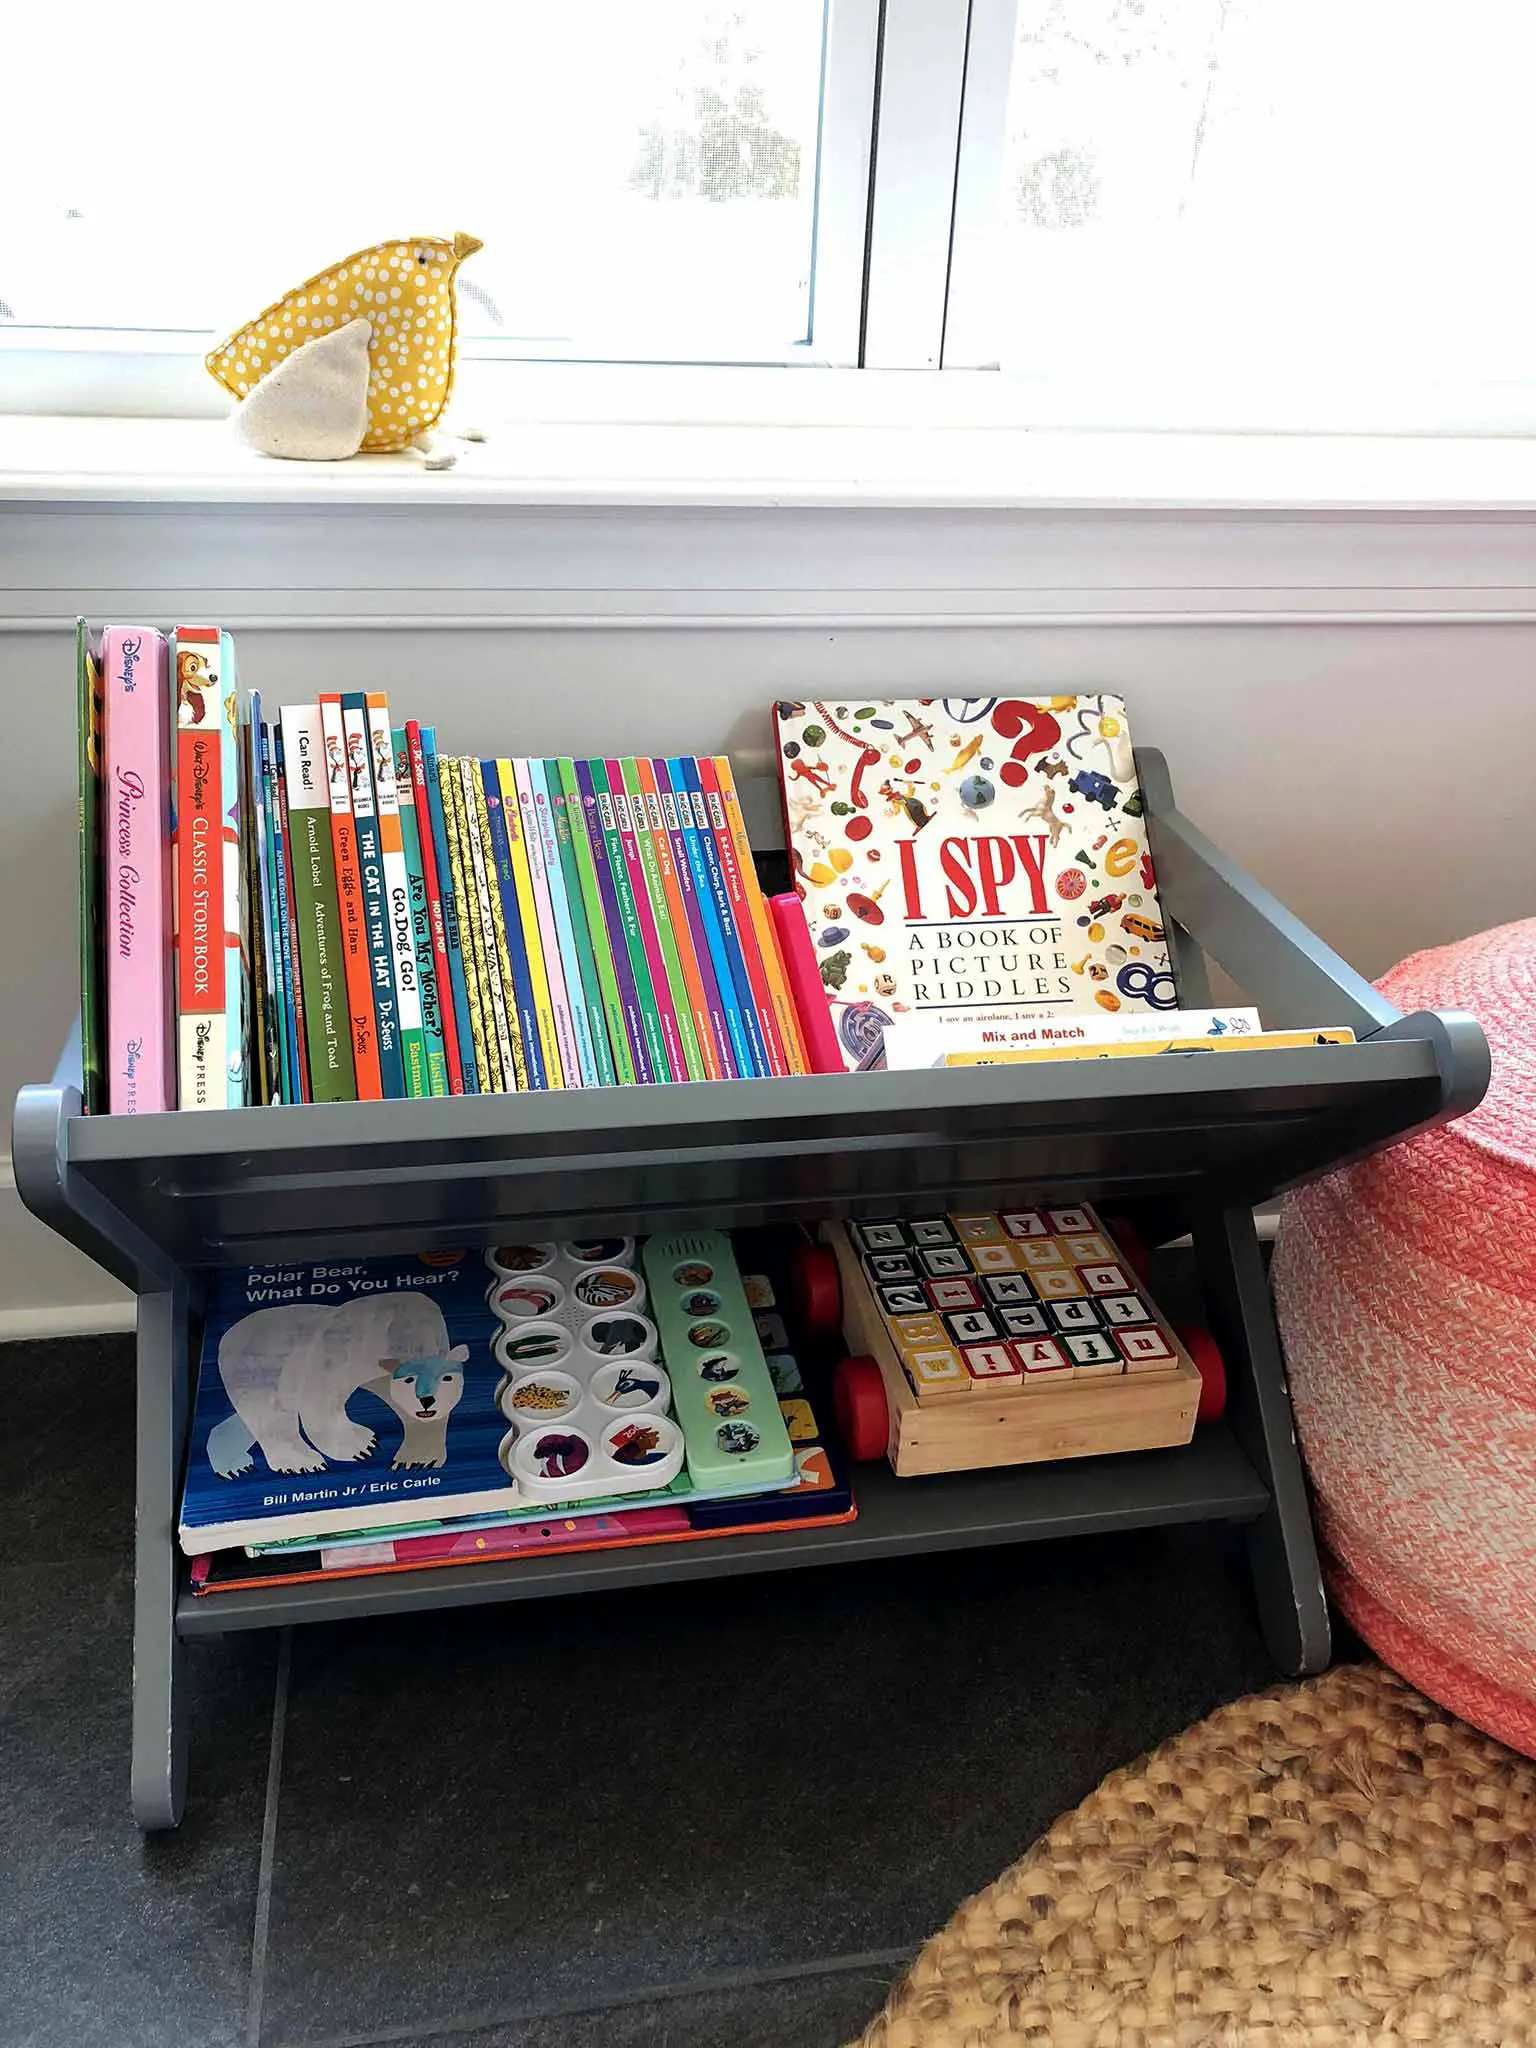 Book caddy - How to Declutter, Organize and Style Kids' Books - That Homebird Life Blog